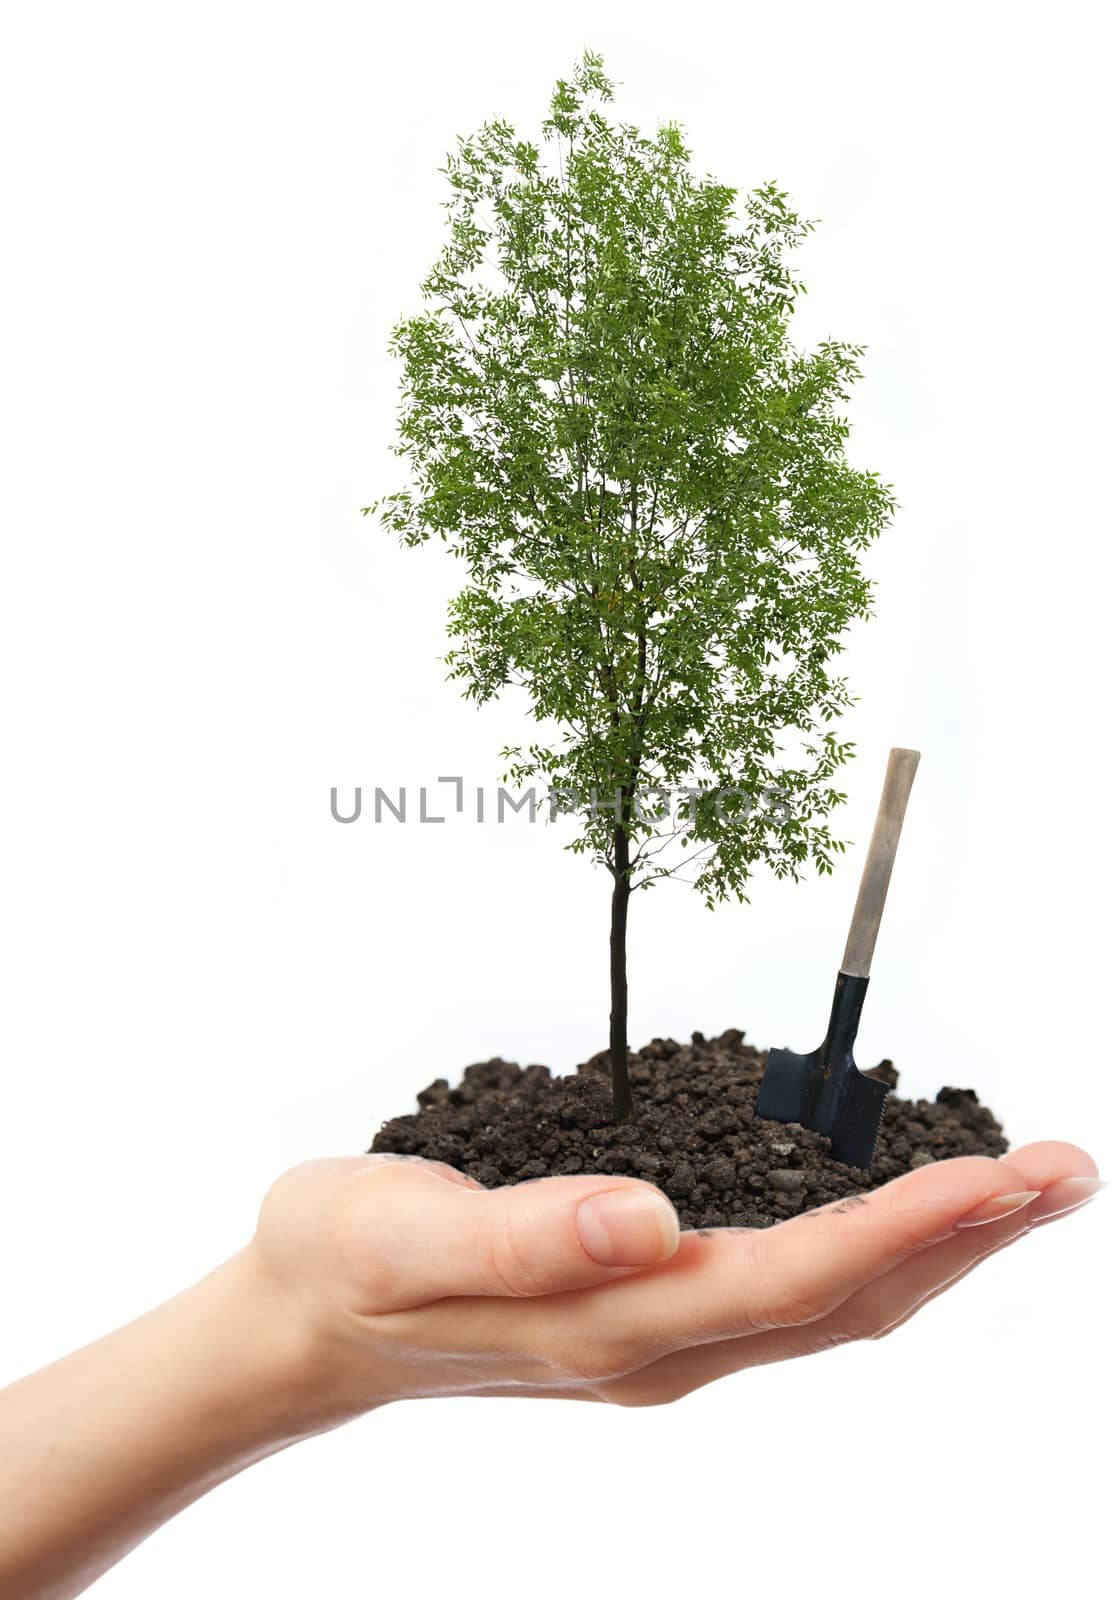 Green ash tree in hand with shovel